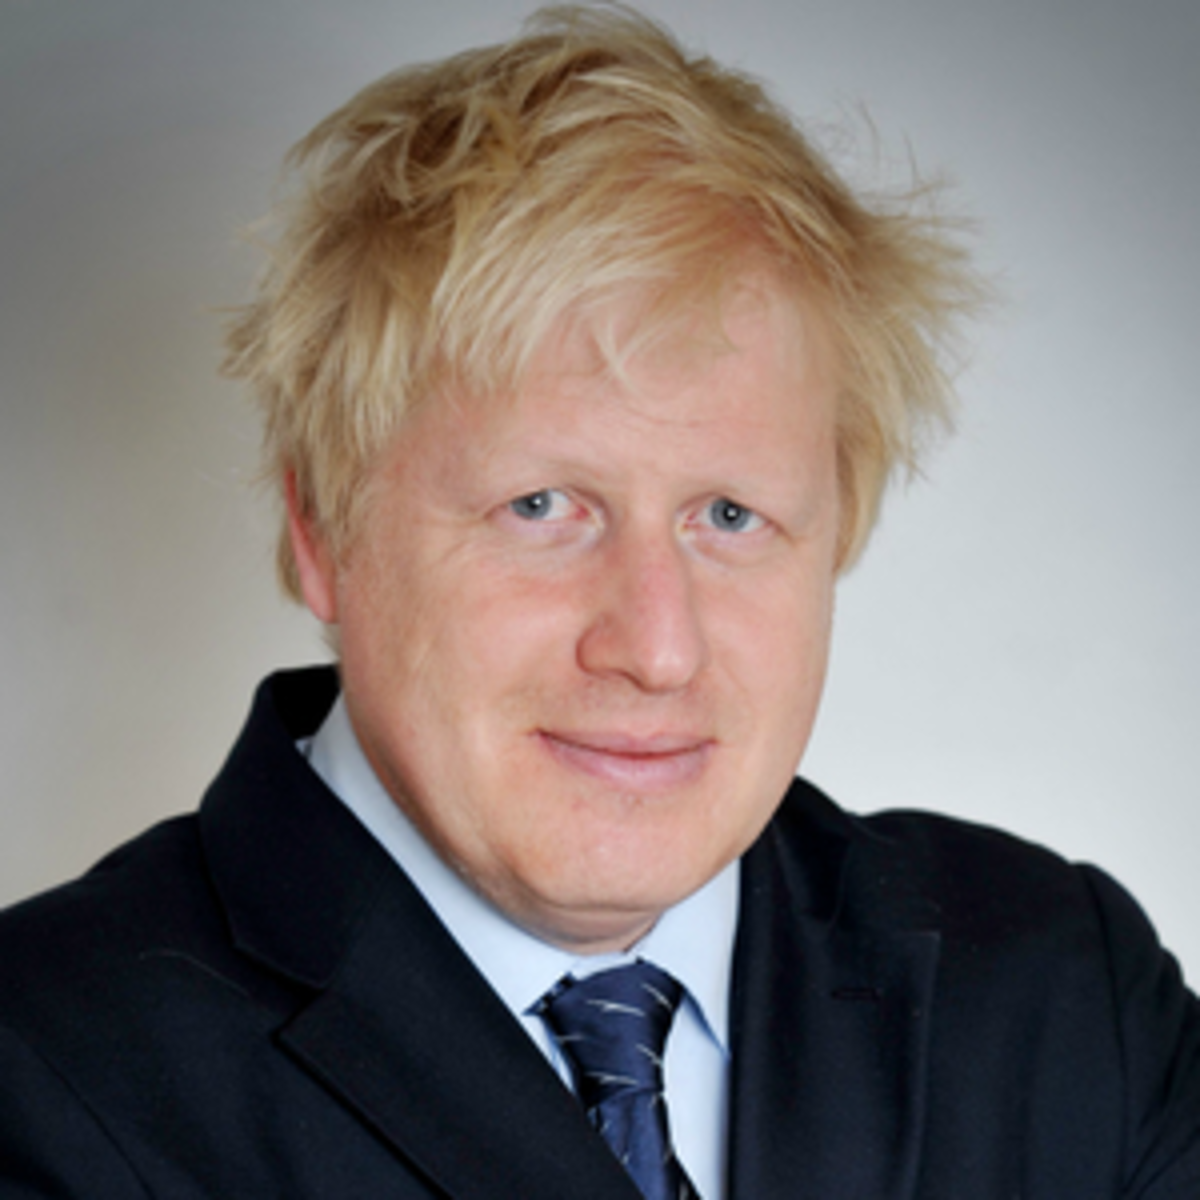 johnson-tries-to-shift-debate-from-sleaze